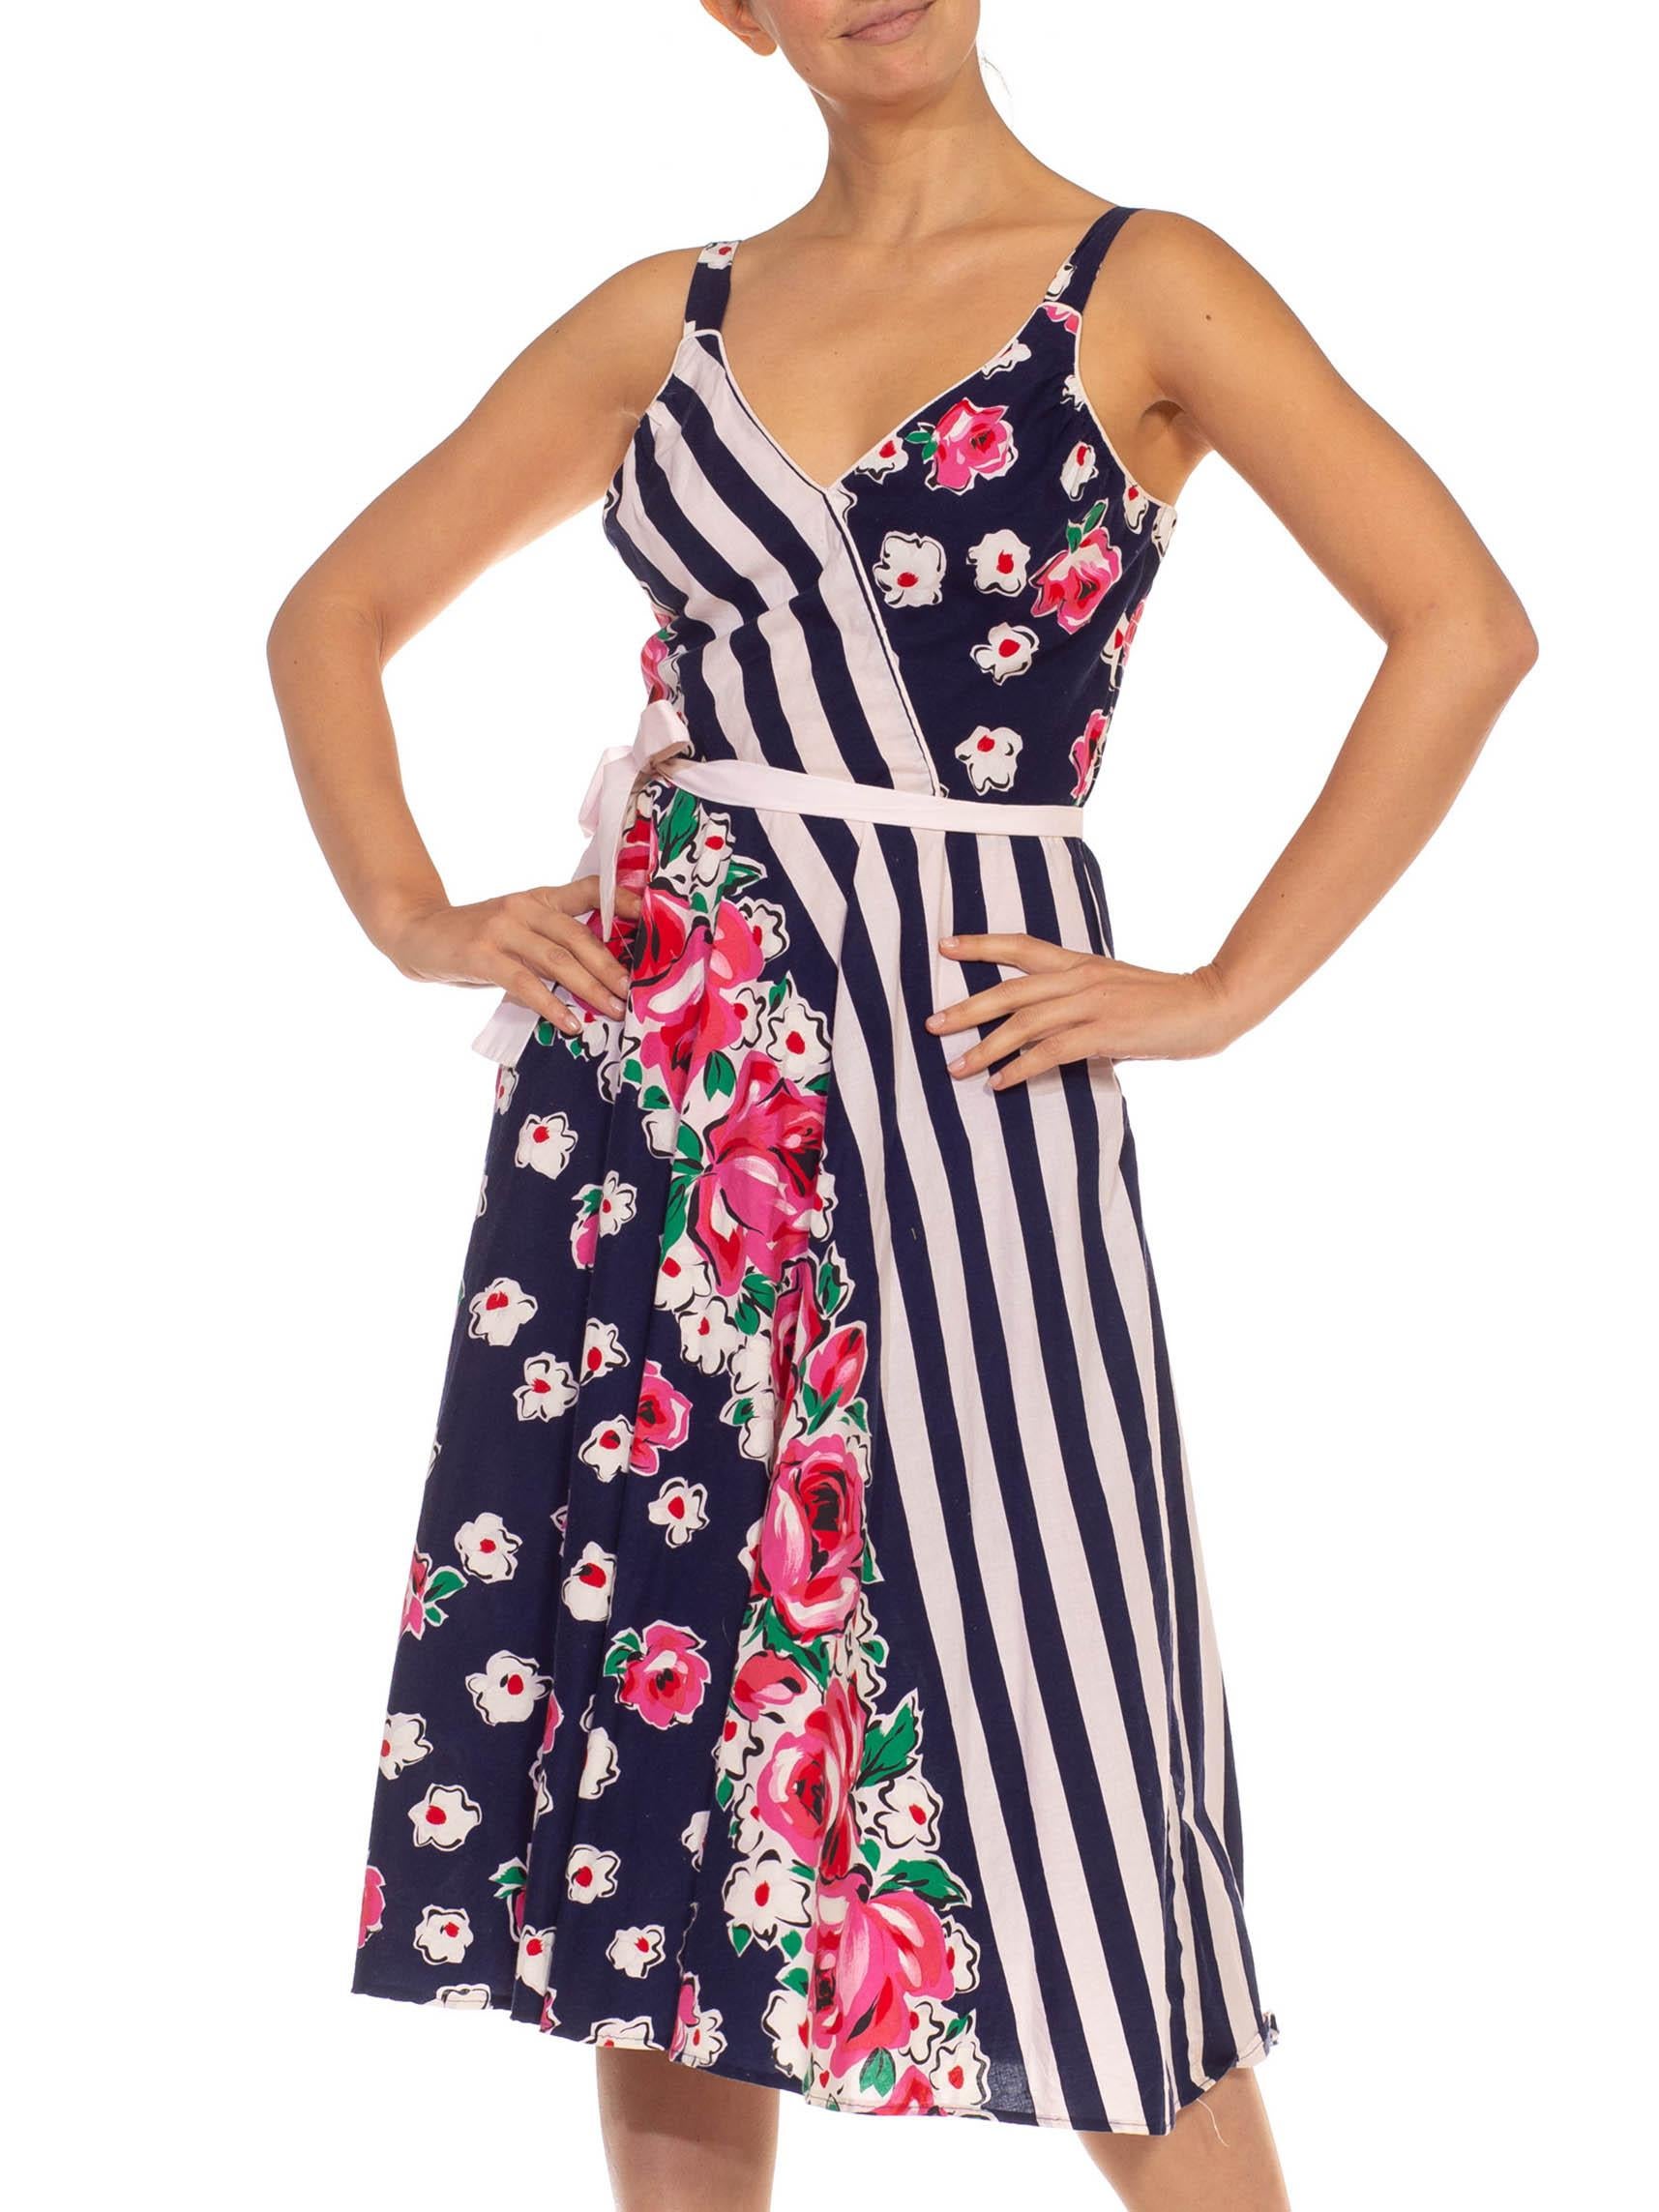 2000S Navy Blue White & Pink Cotton Stripe Floral Printed Dress Linen With Bra For Sale 2